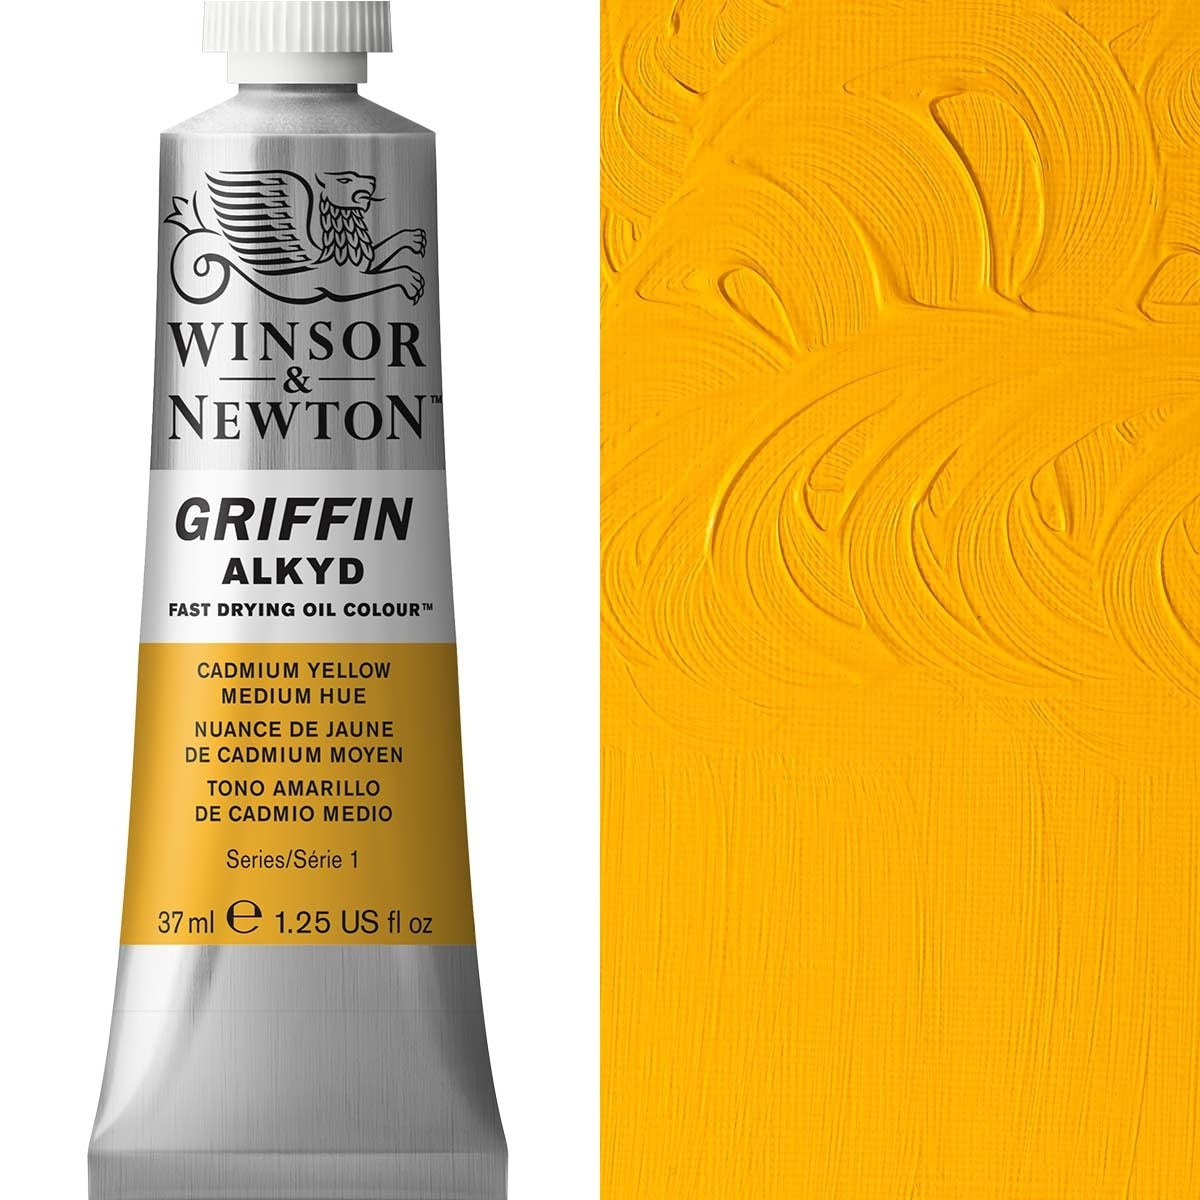 Winsor and Newton - Griffin ALKYD Oil Colour - 37ml - Cadmium Yellow Hue